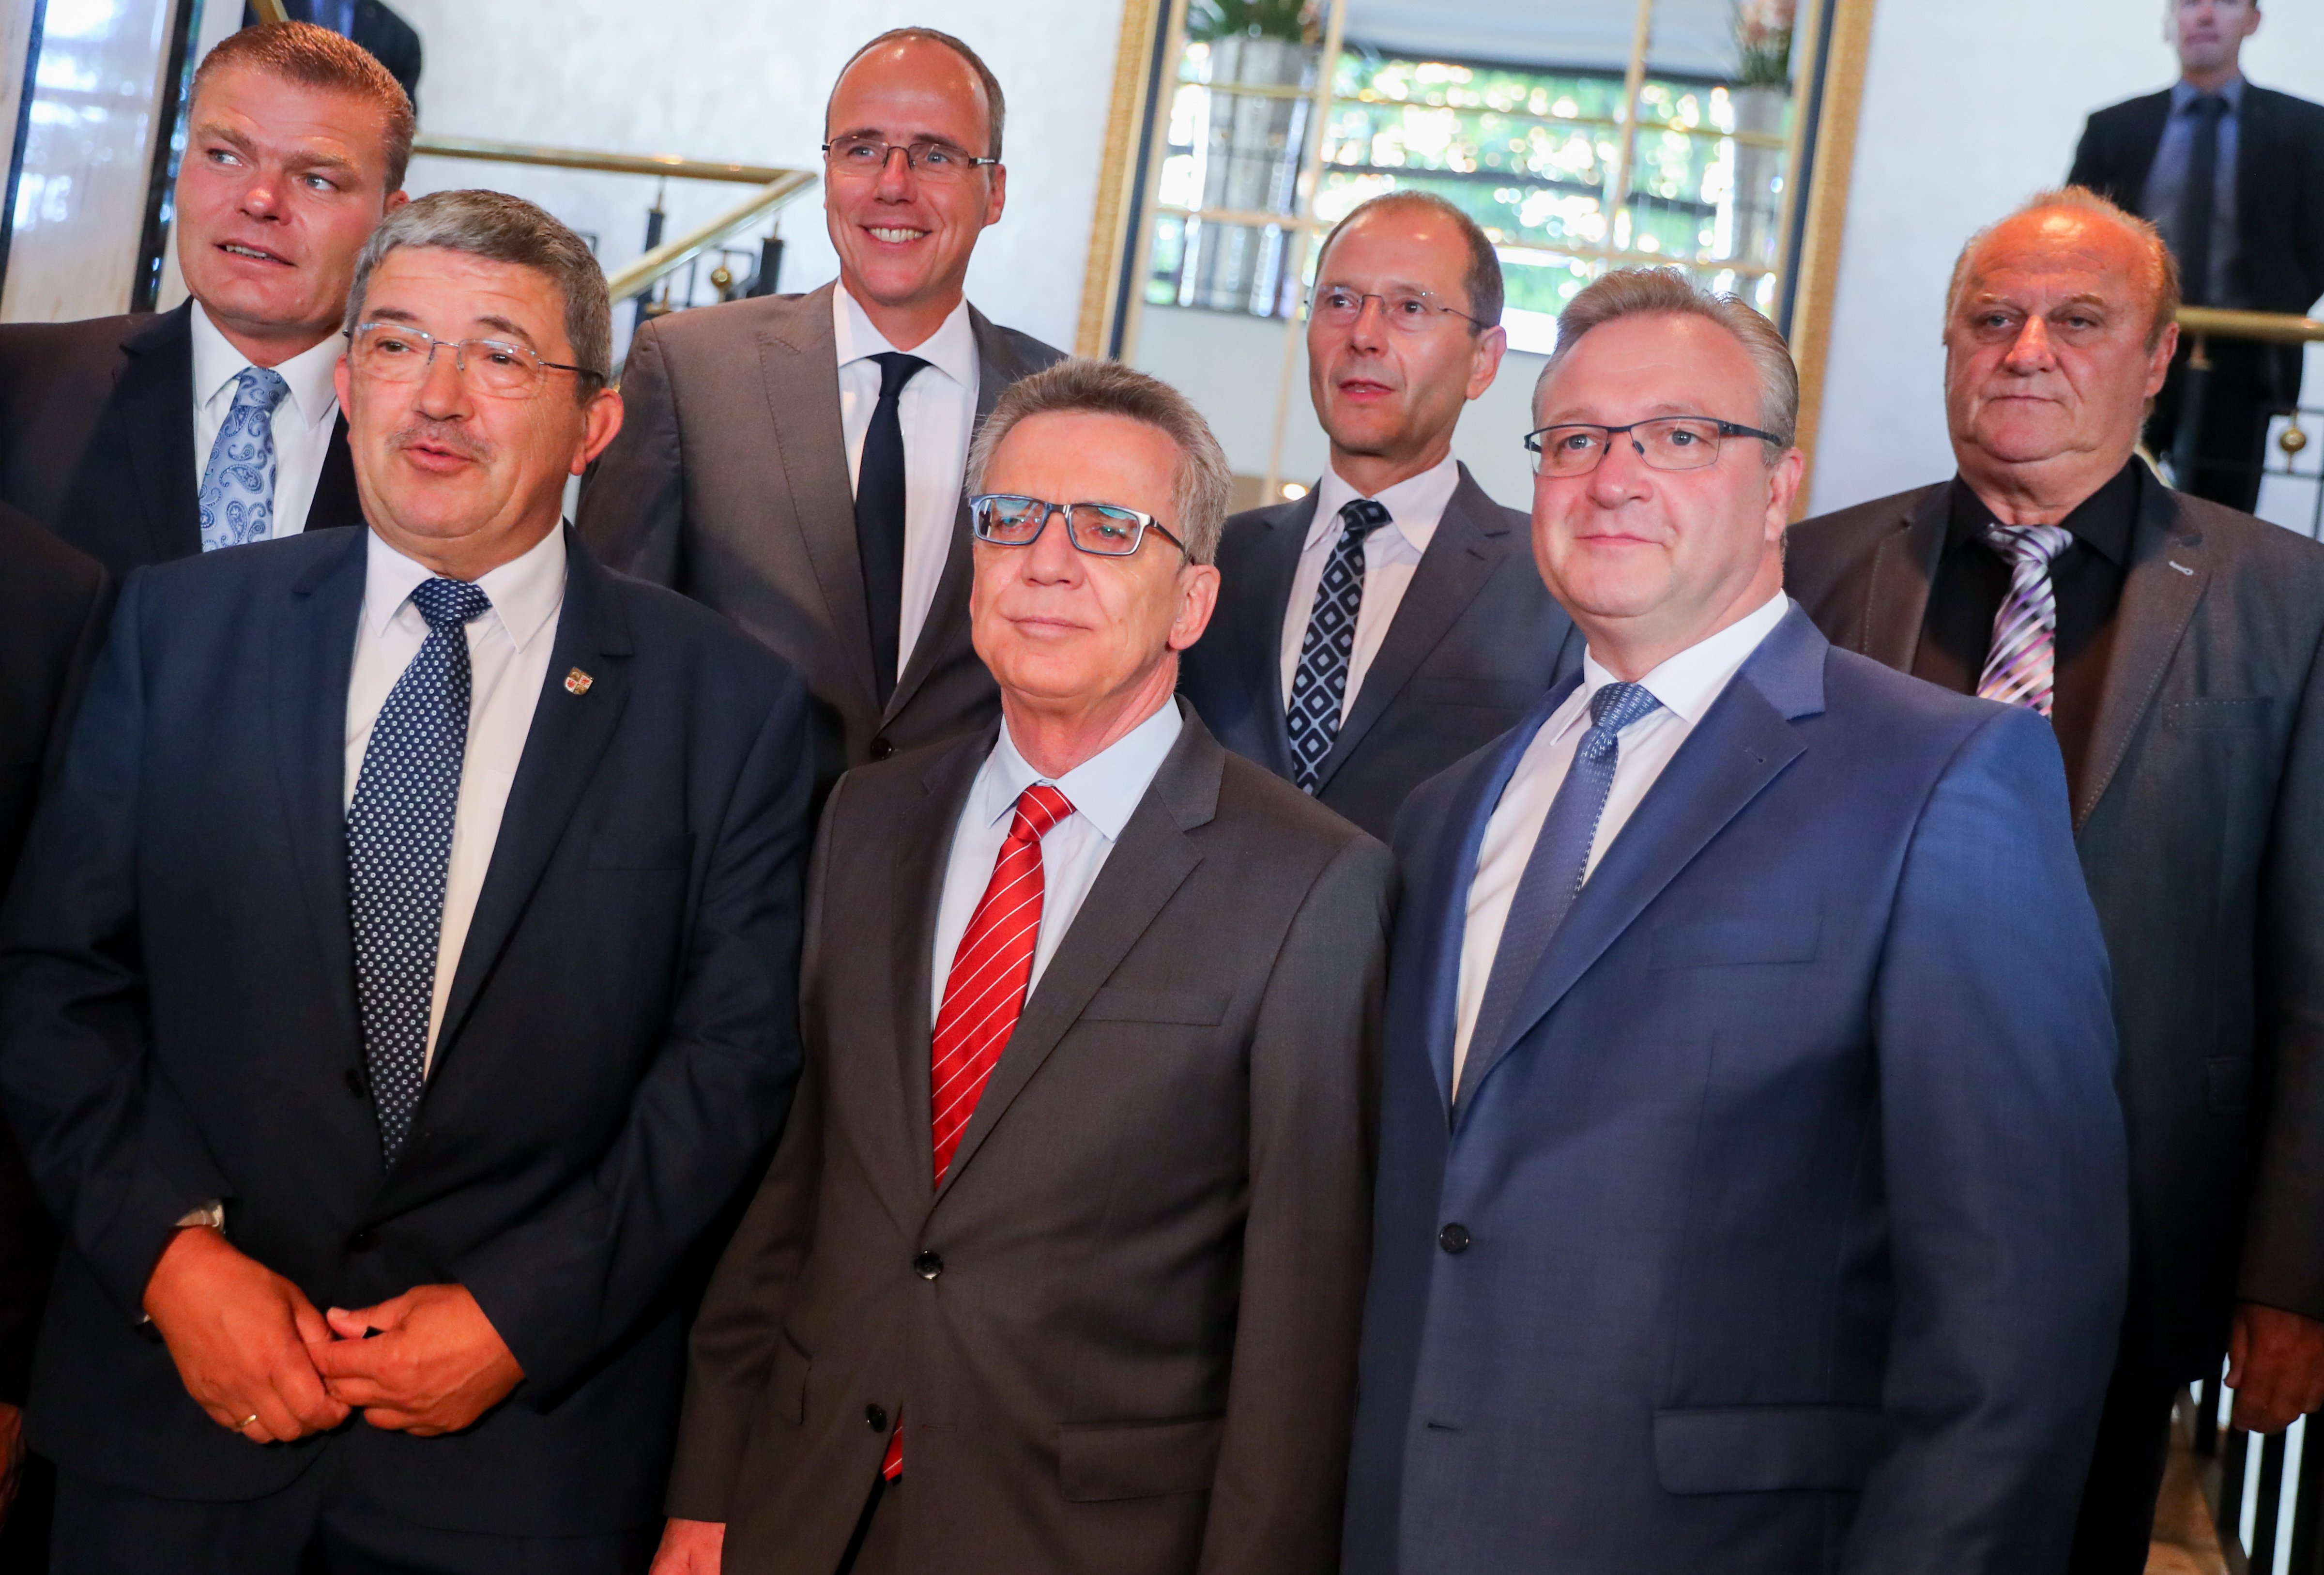 German Interior Minister Thomas de Maiziere (CDU, 3.f.r.) pictured next to his interior minister colleagues. Topics of discussion include a burqa ban and dual citizenship (Kay Nietfeld—Kay Nietfeld/picture-alliance/dpa/AP Images)